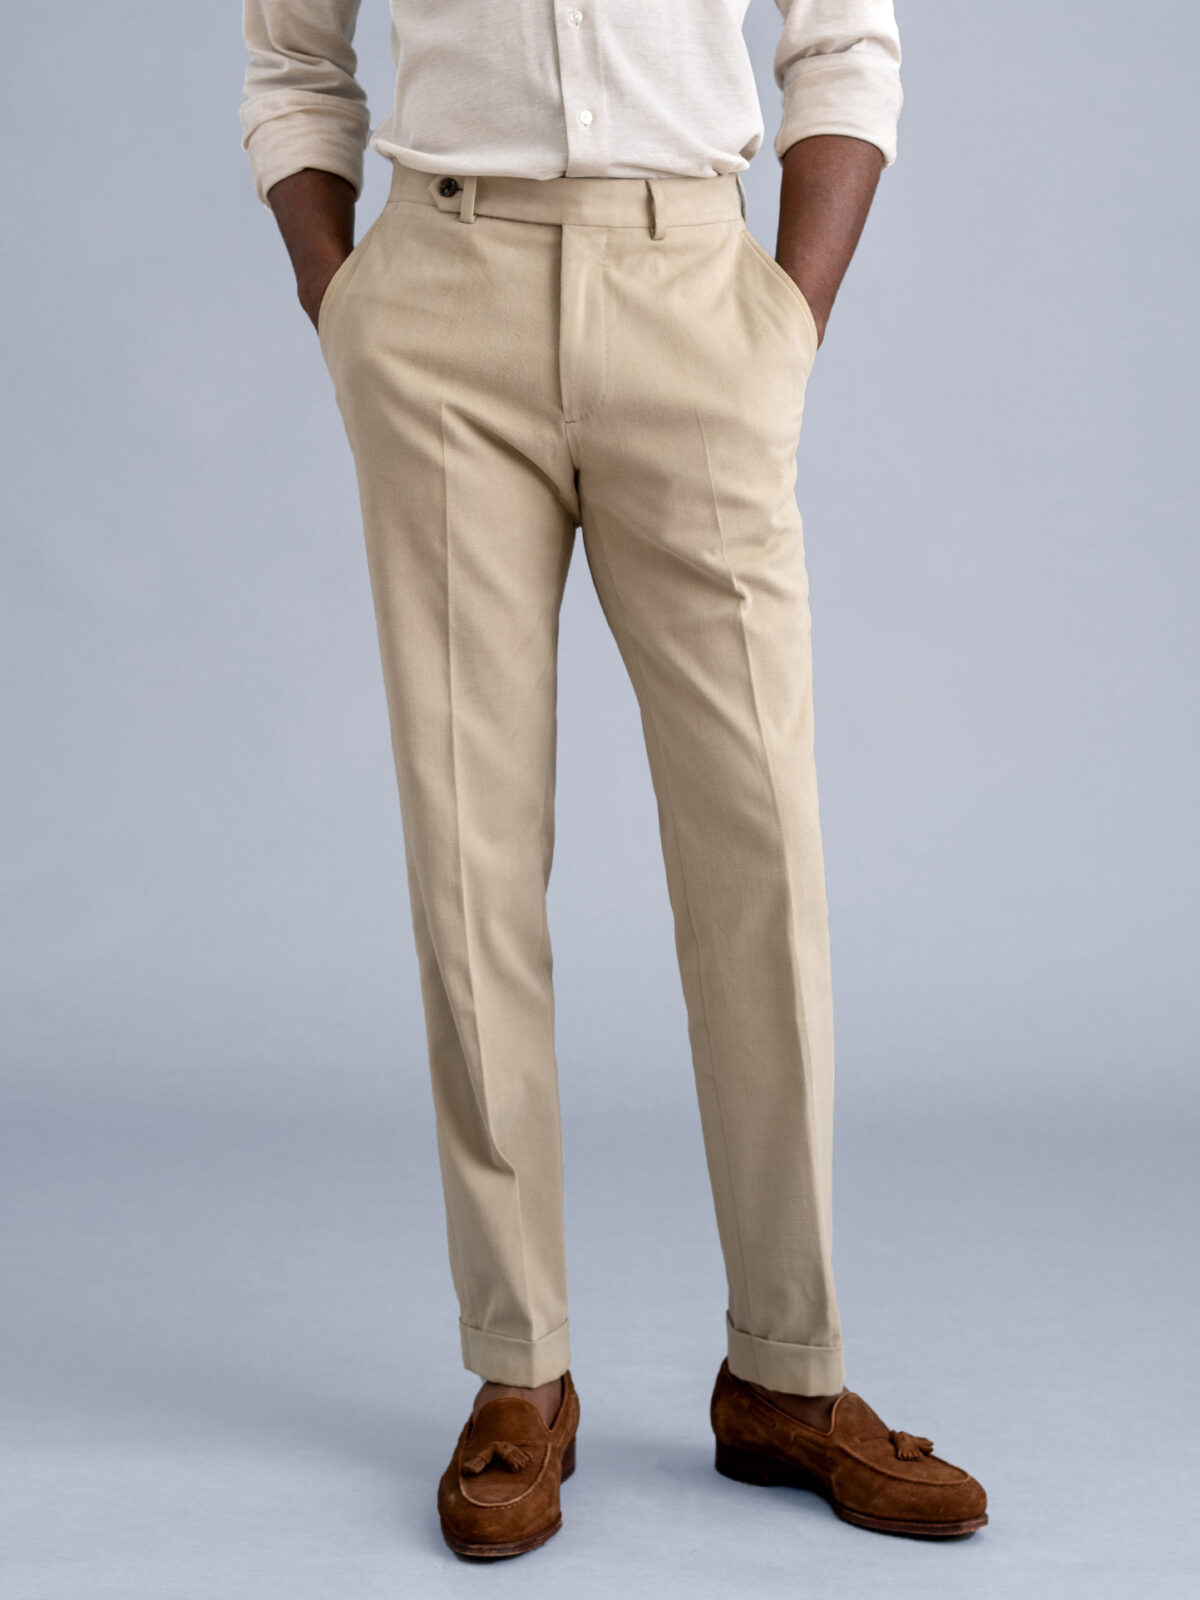 Beige Heavy Brushed Cotton Stretch Dress Pant - Custom Fit